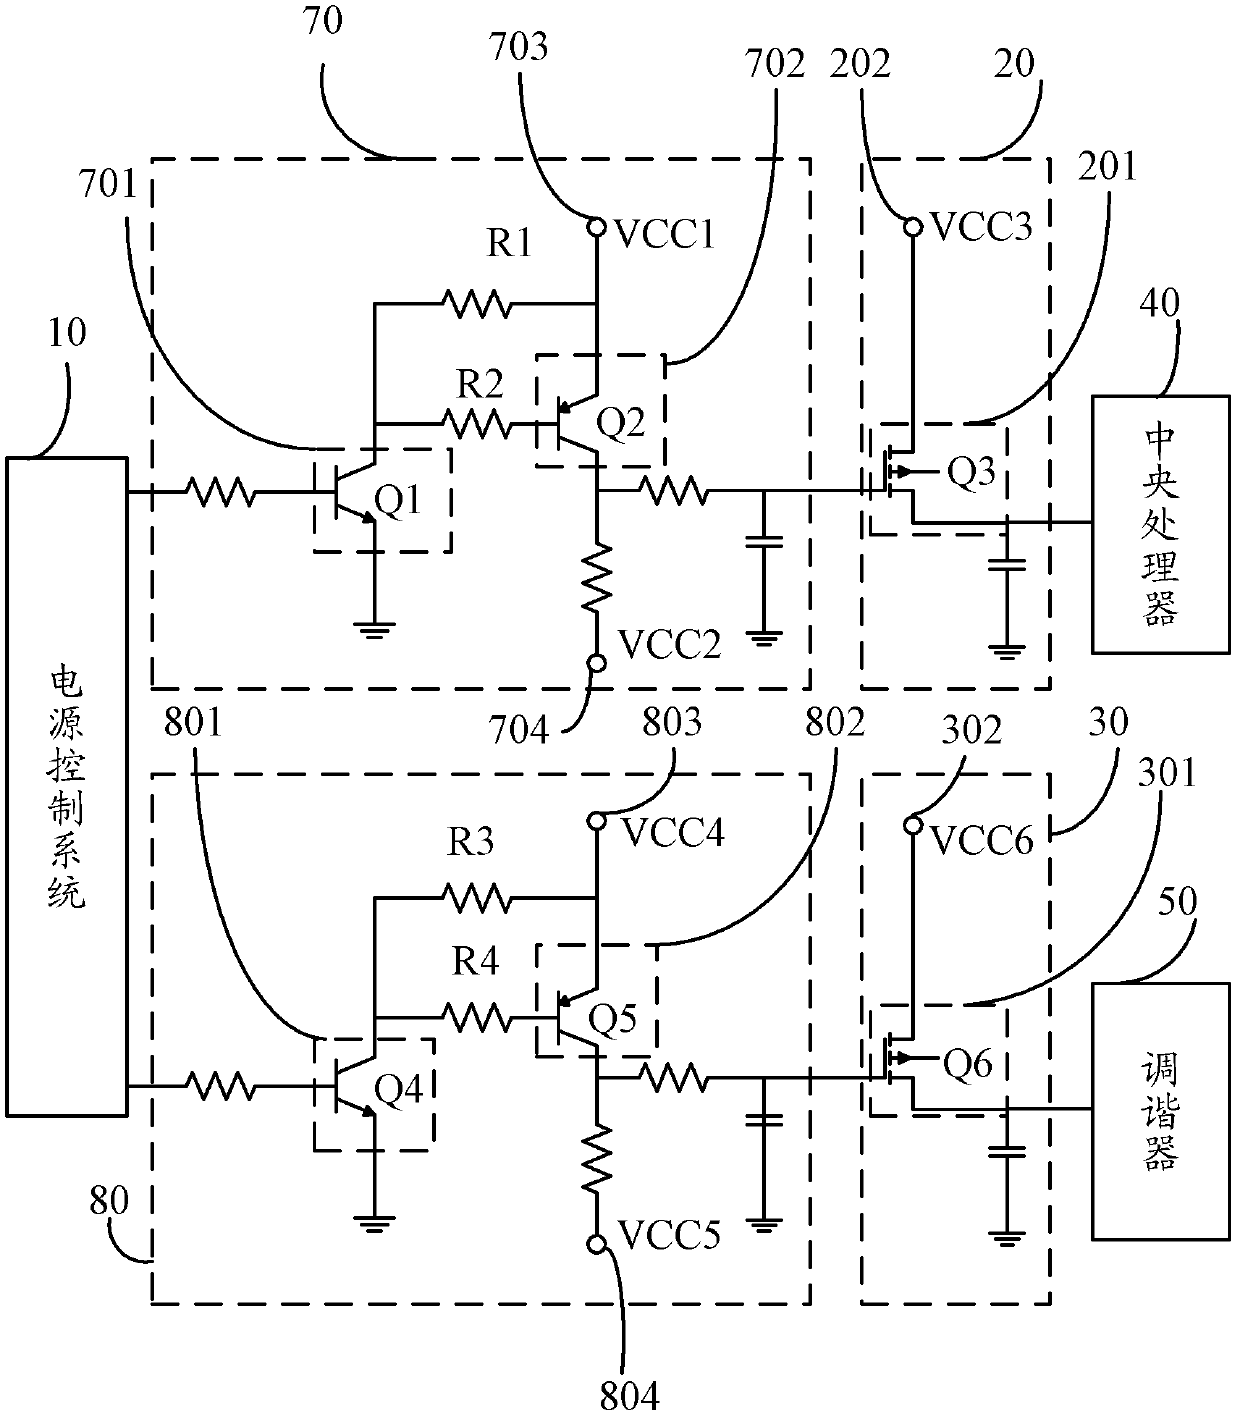 Anti-interference circuit of tuner